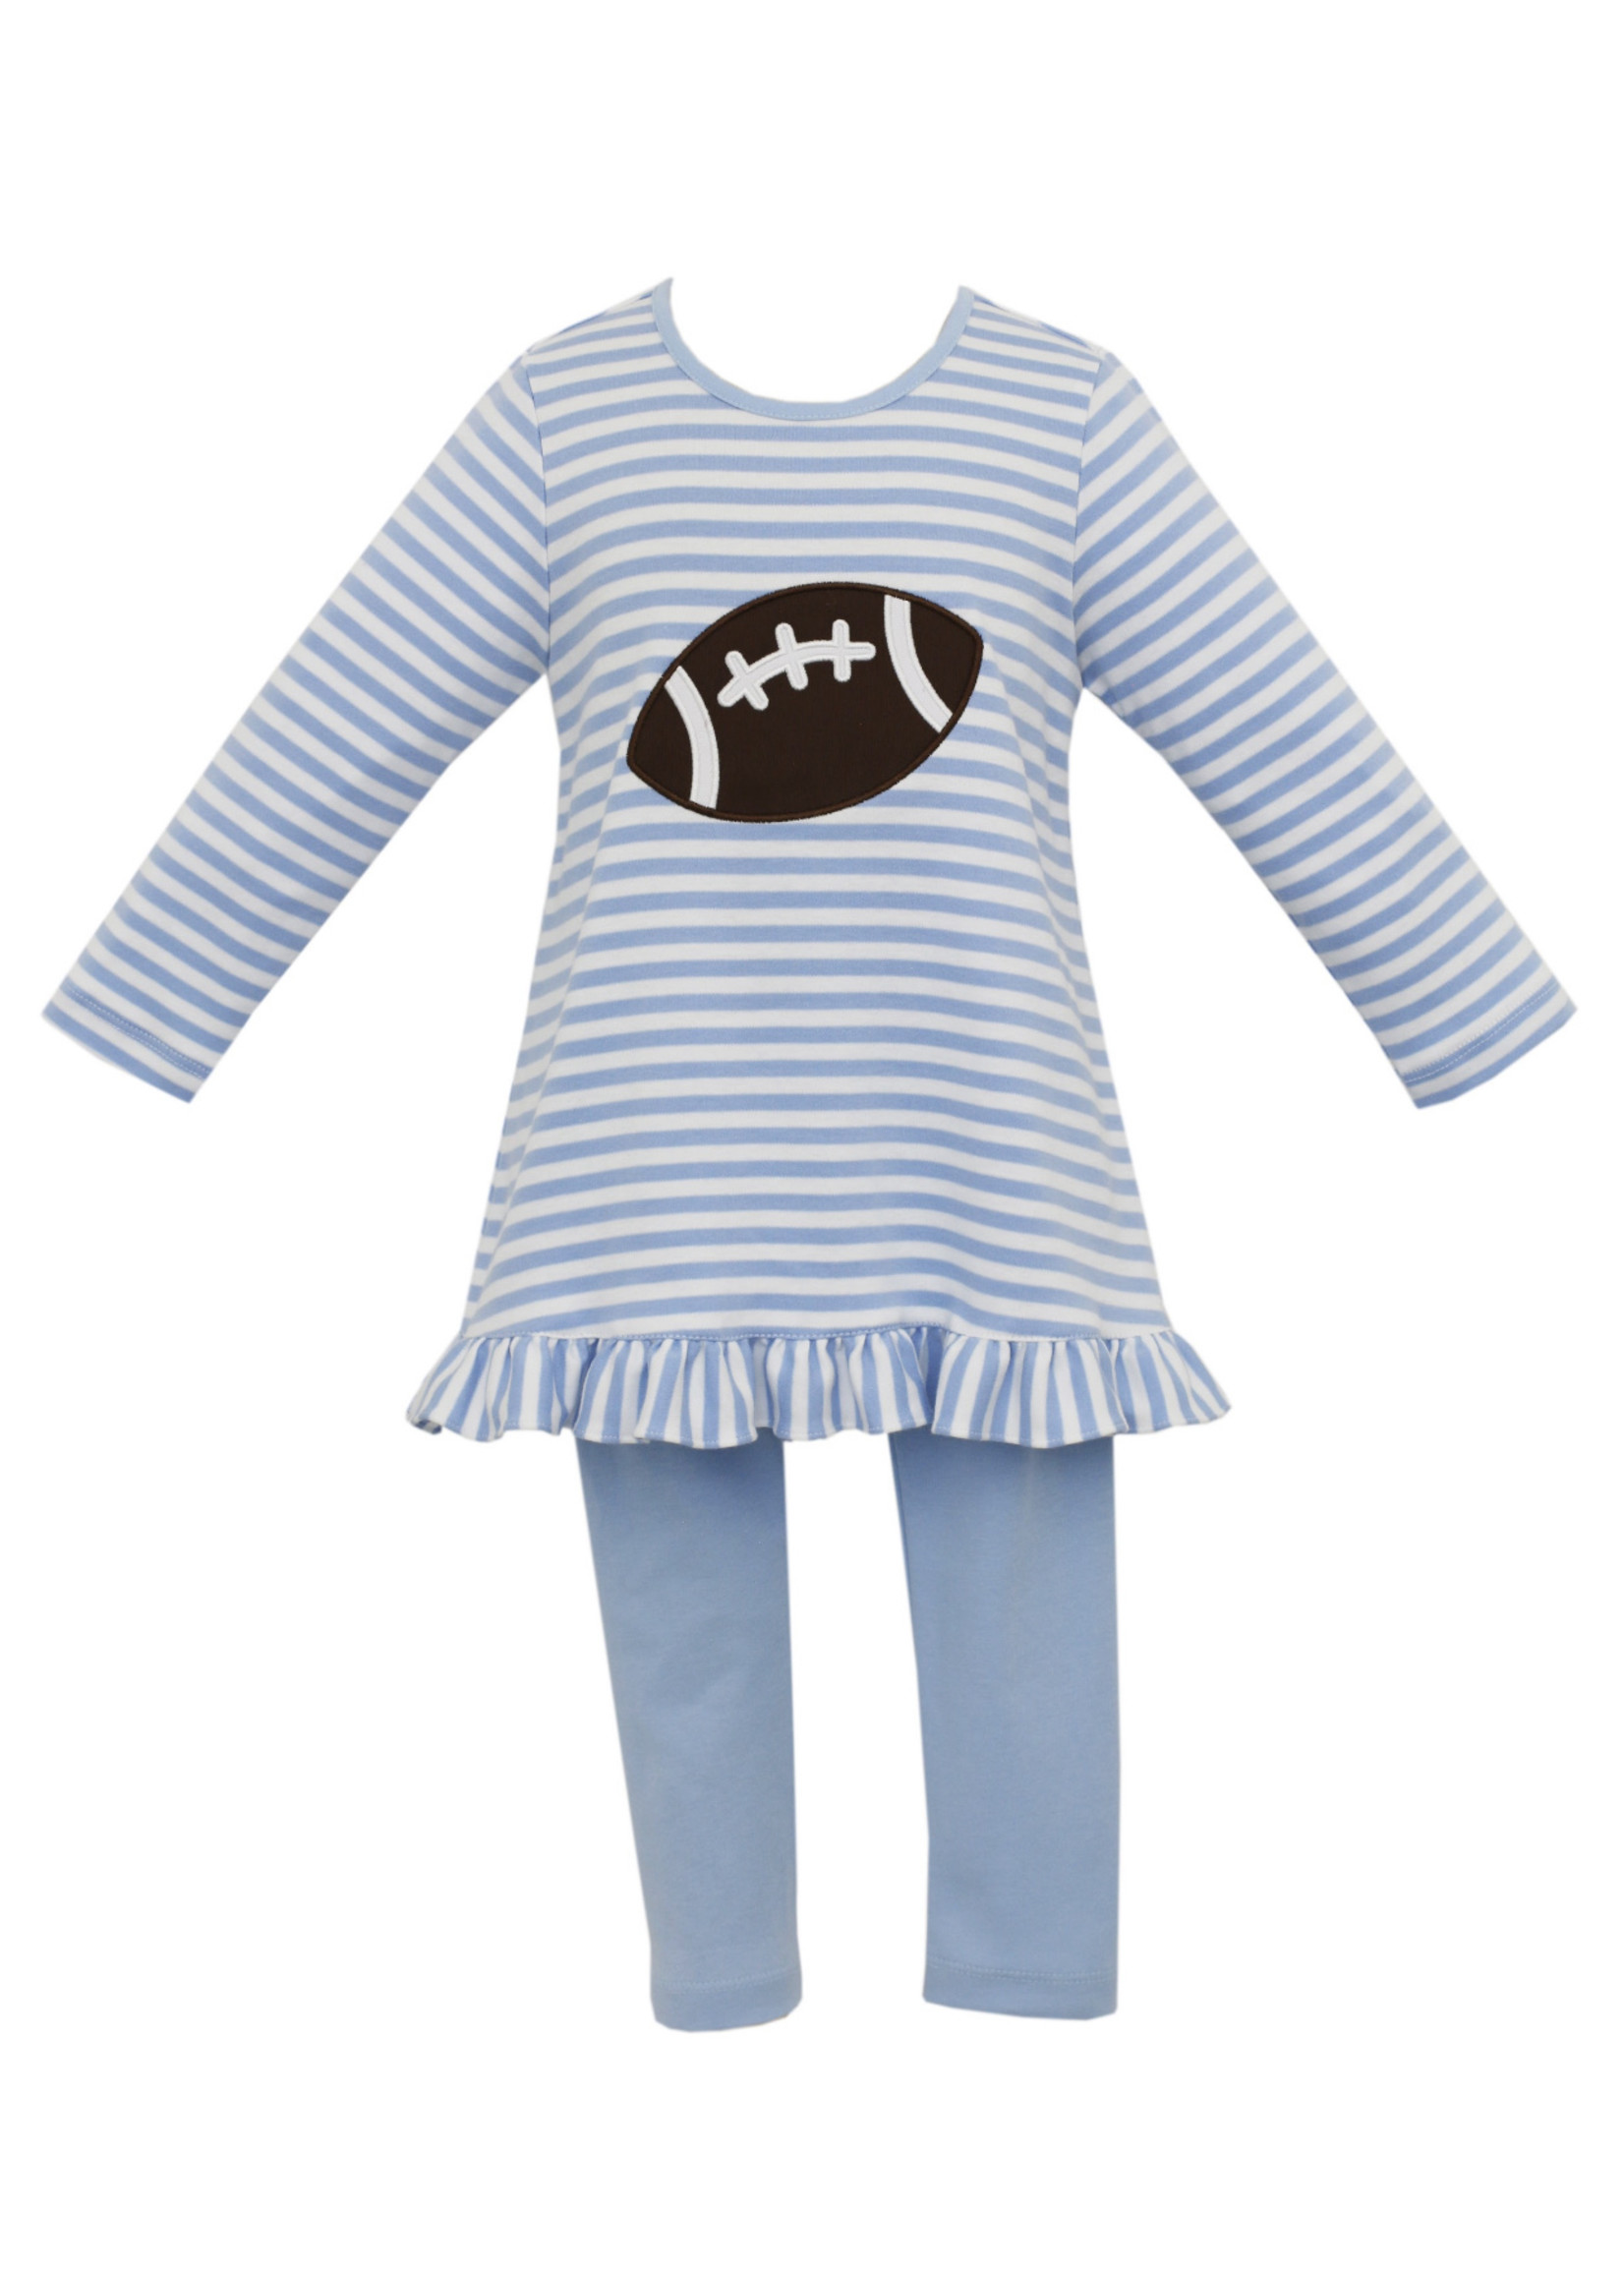 Claire and Charlie Tunic Set - Blue Stripe Football